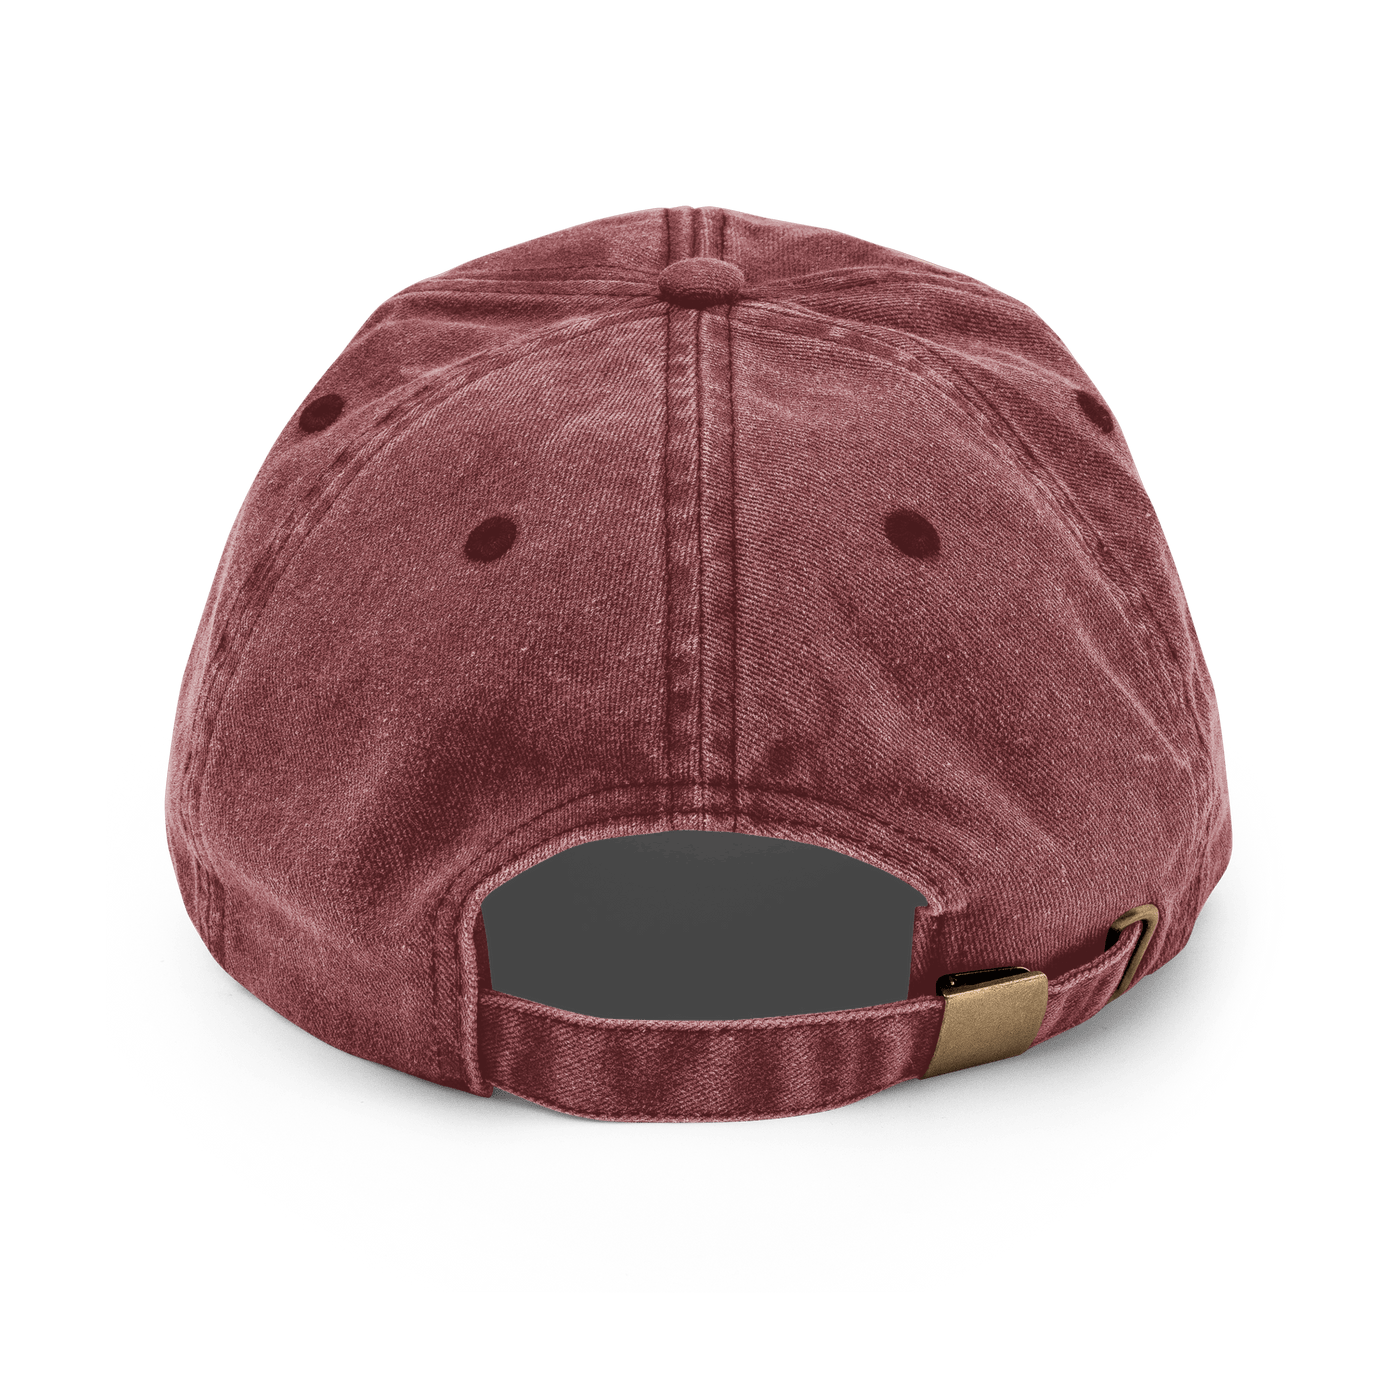 Out of office Vintage Hat - Vintage Red - - Just Another Cap Store